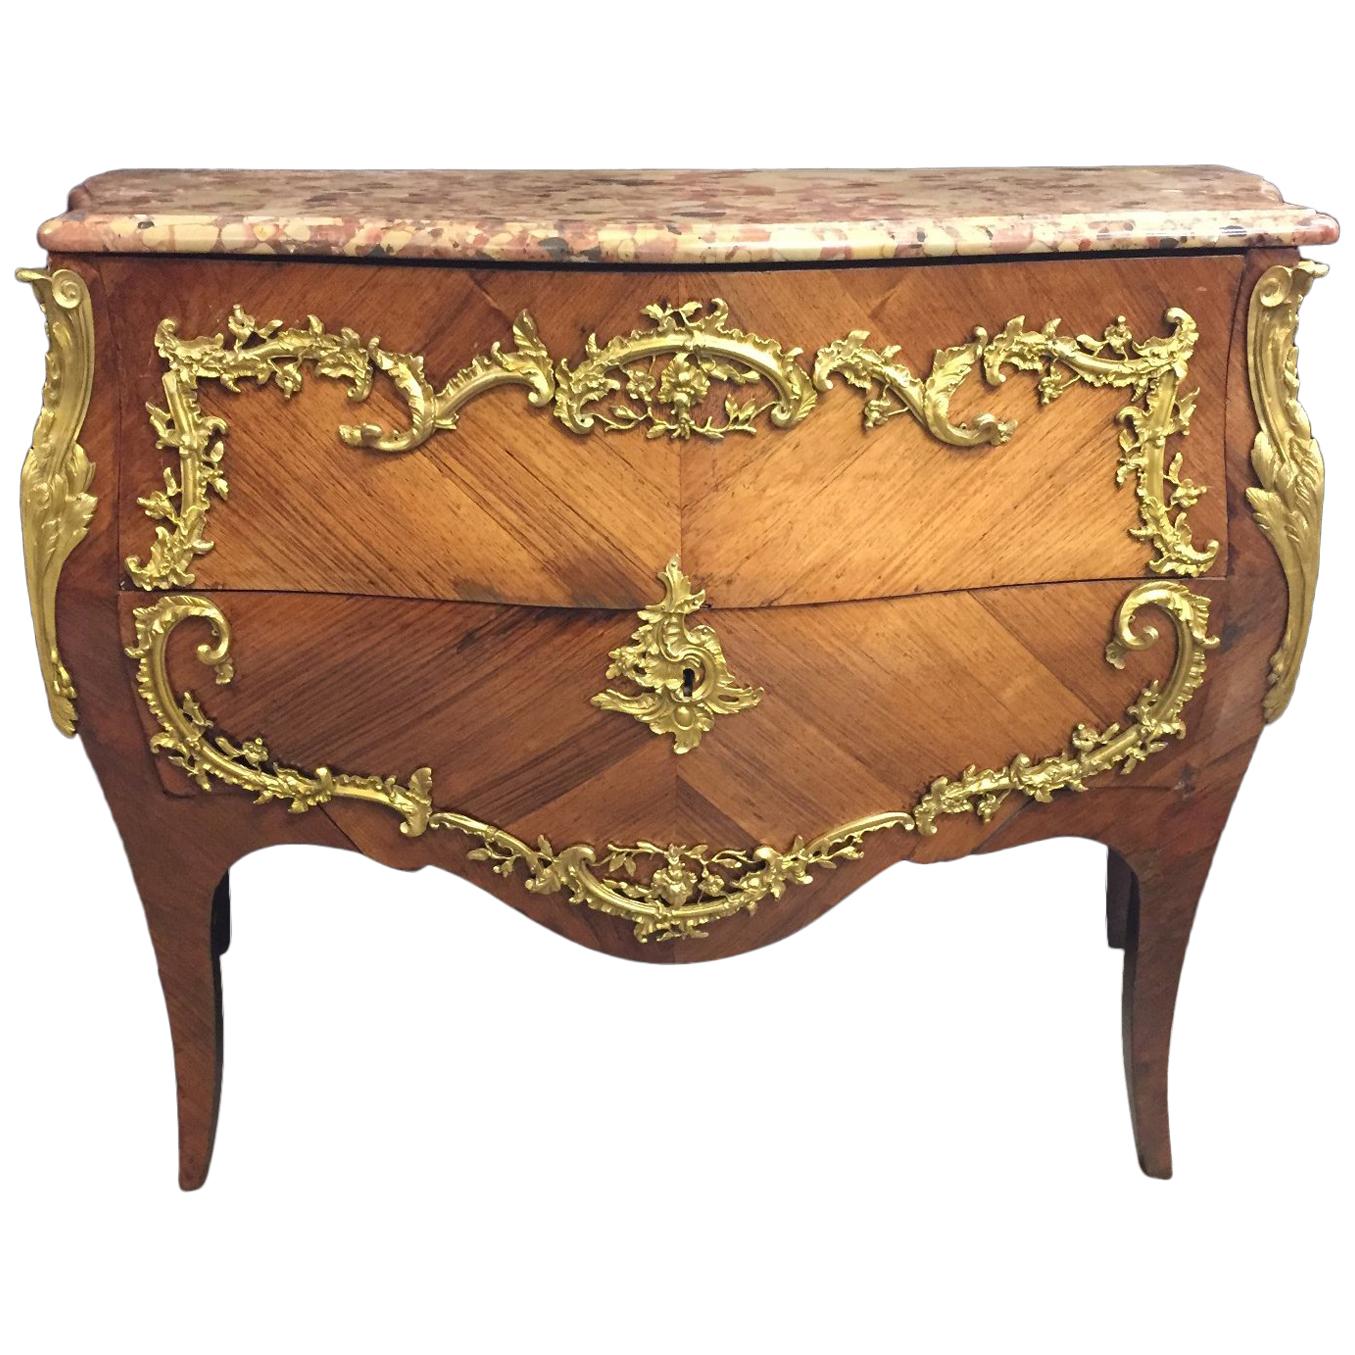 French Louis XV Style Commode, 19th Century Signed JVHD 